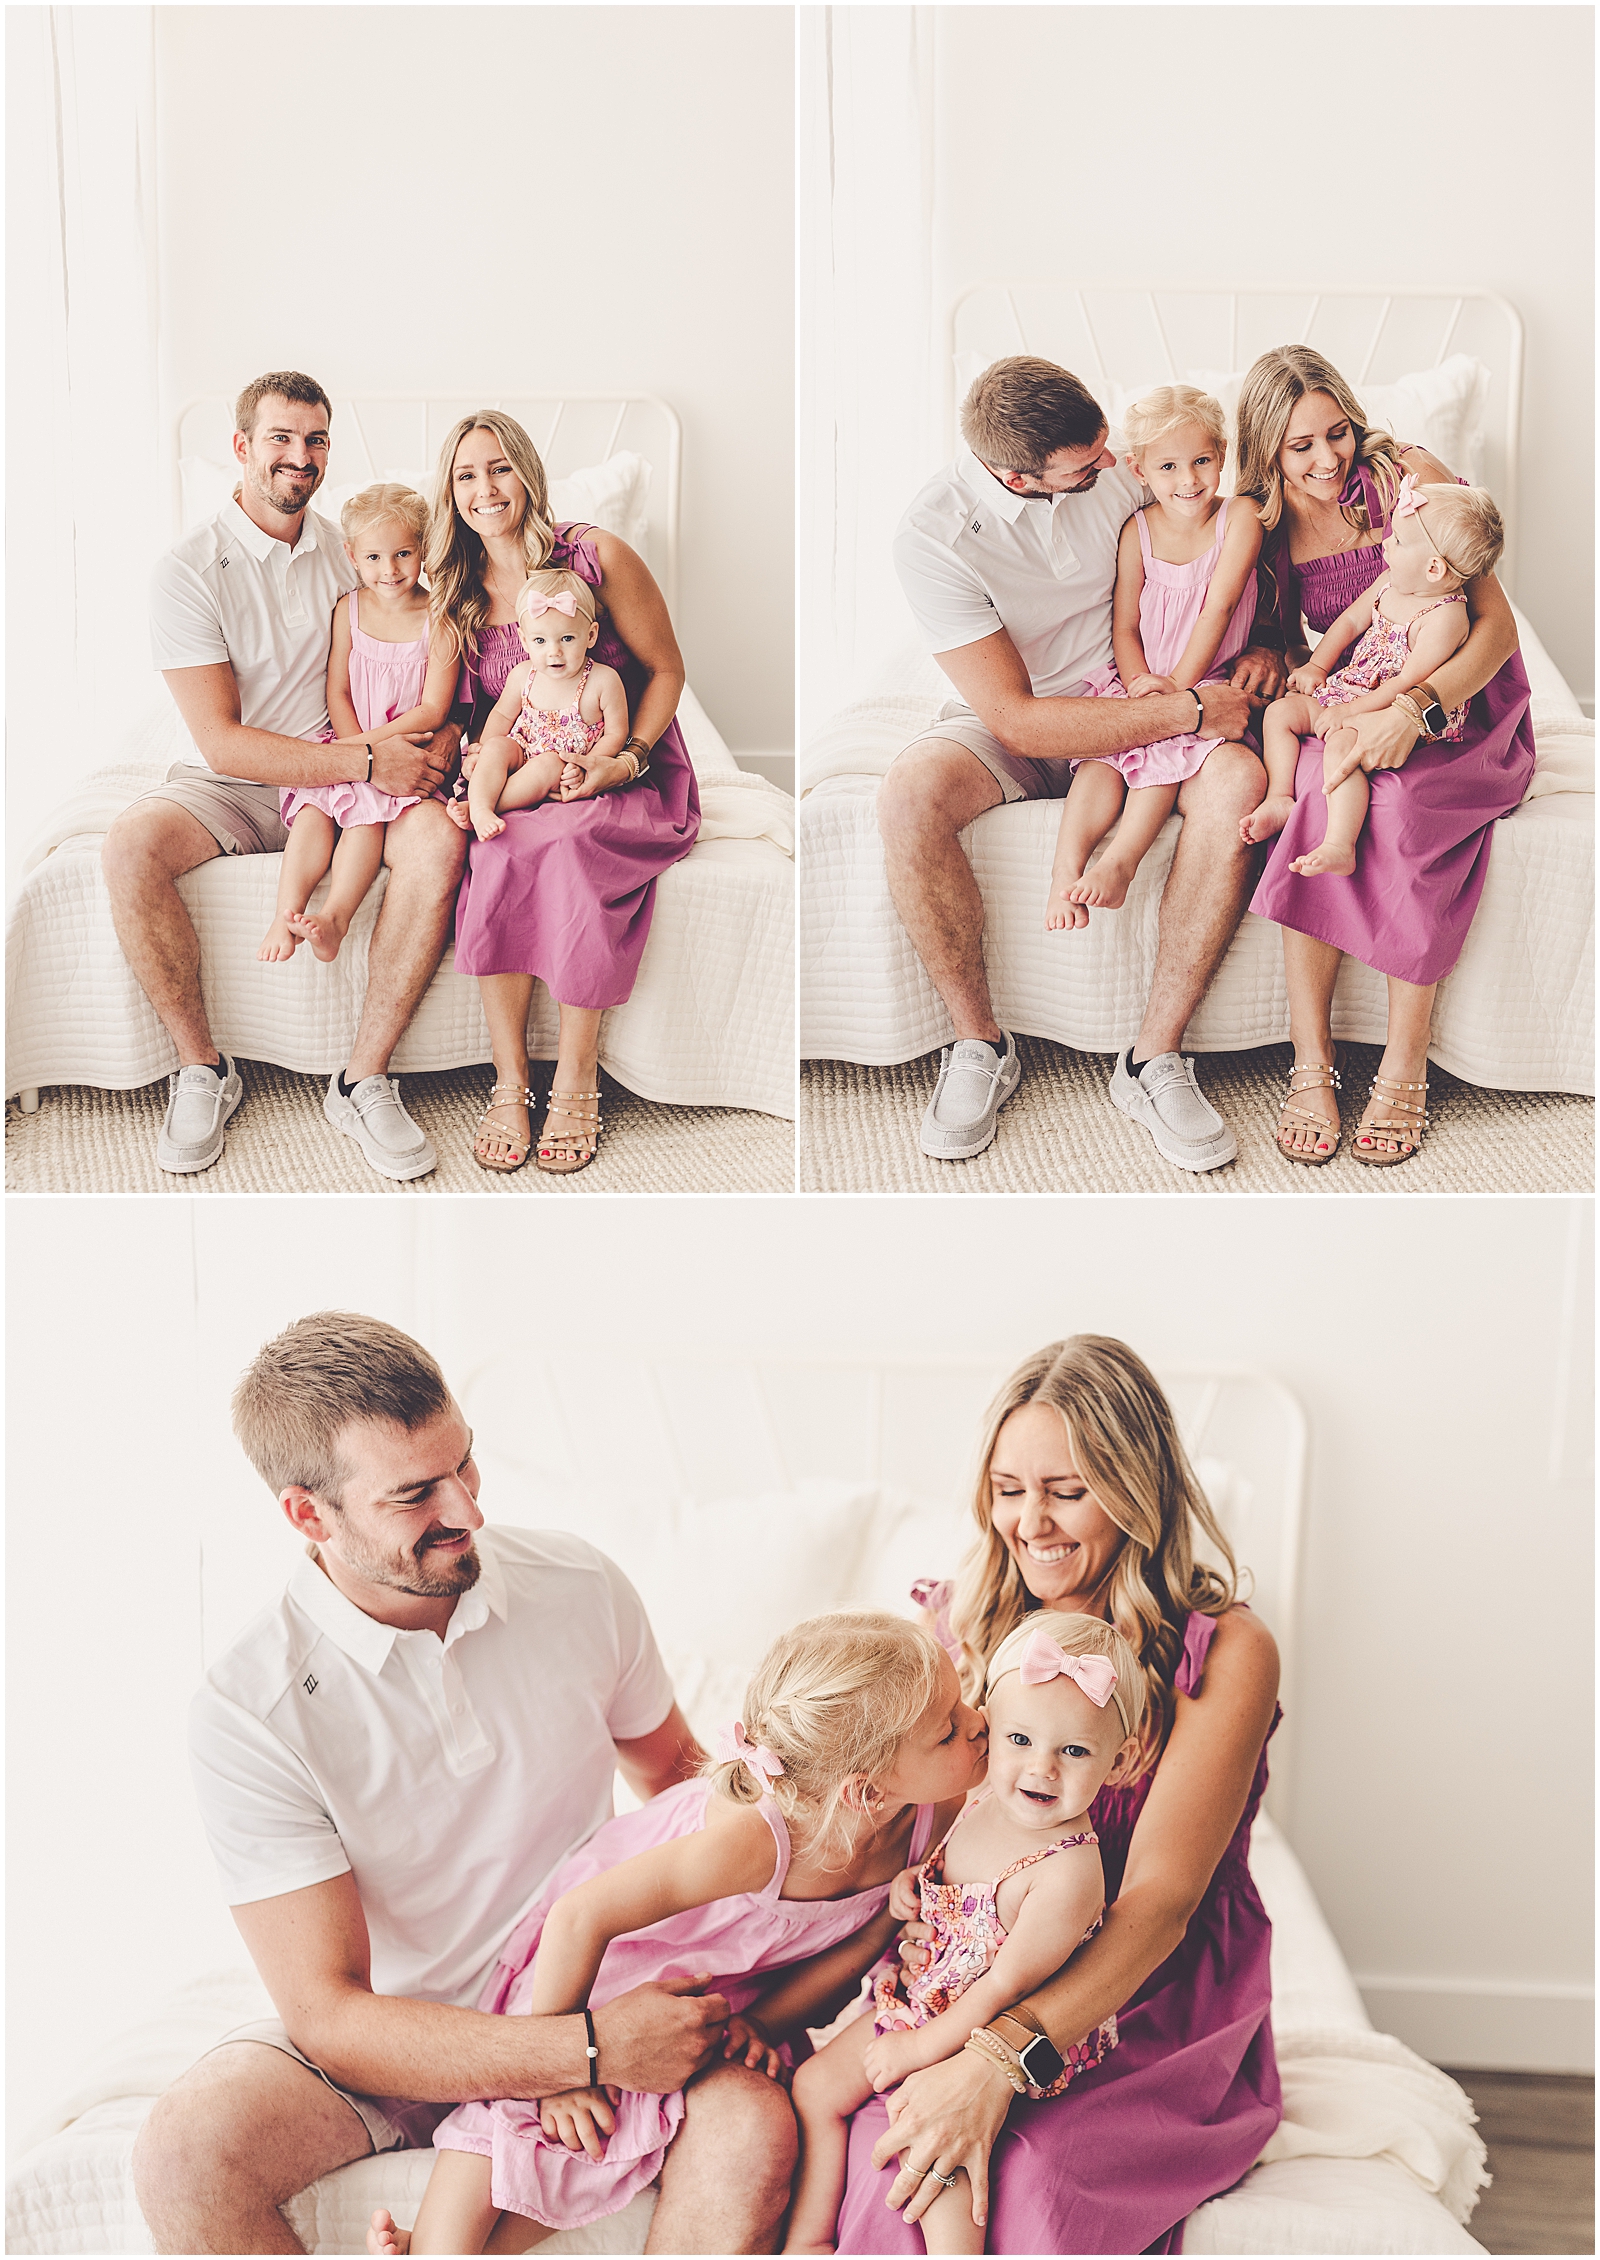 Studio one year milestone session in Kankakee for the Kunce family with Kankakee county family photographer Kara Evans Photographer.